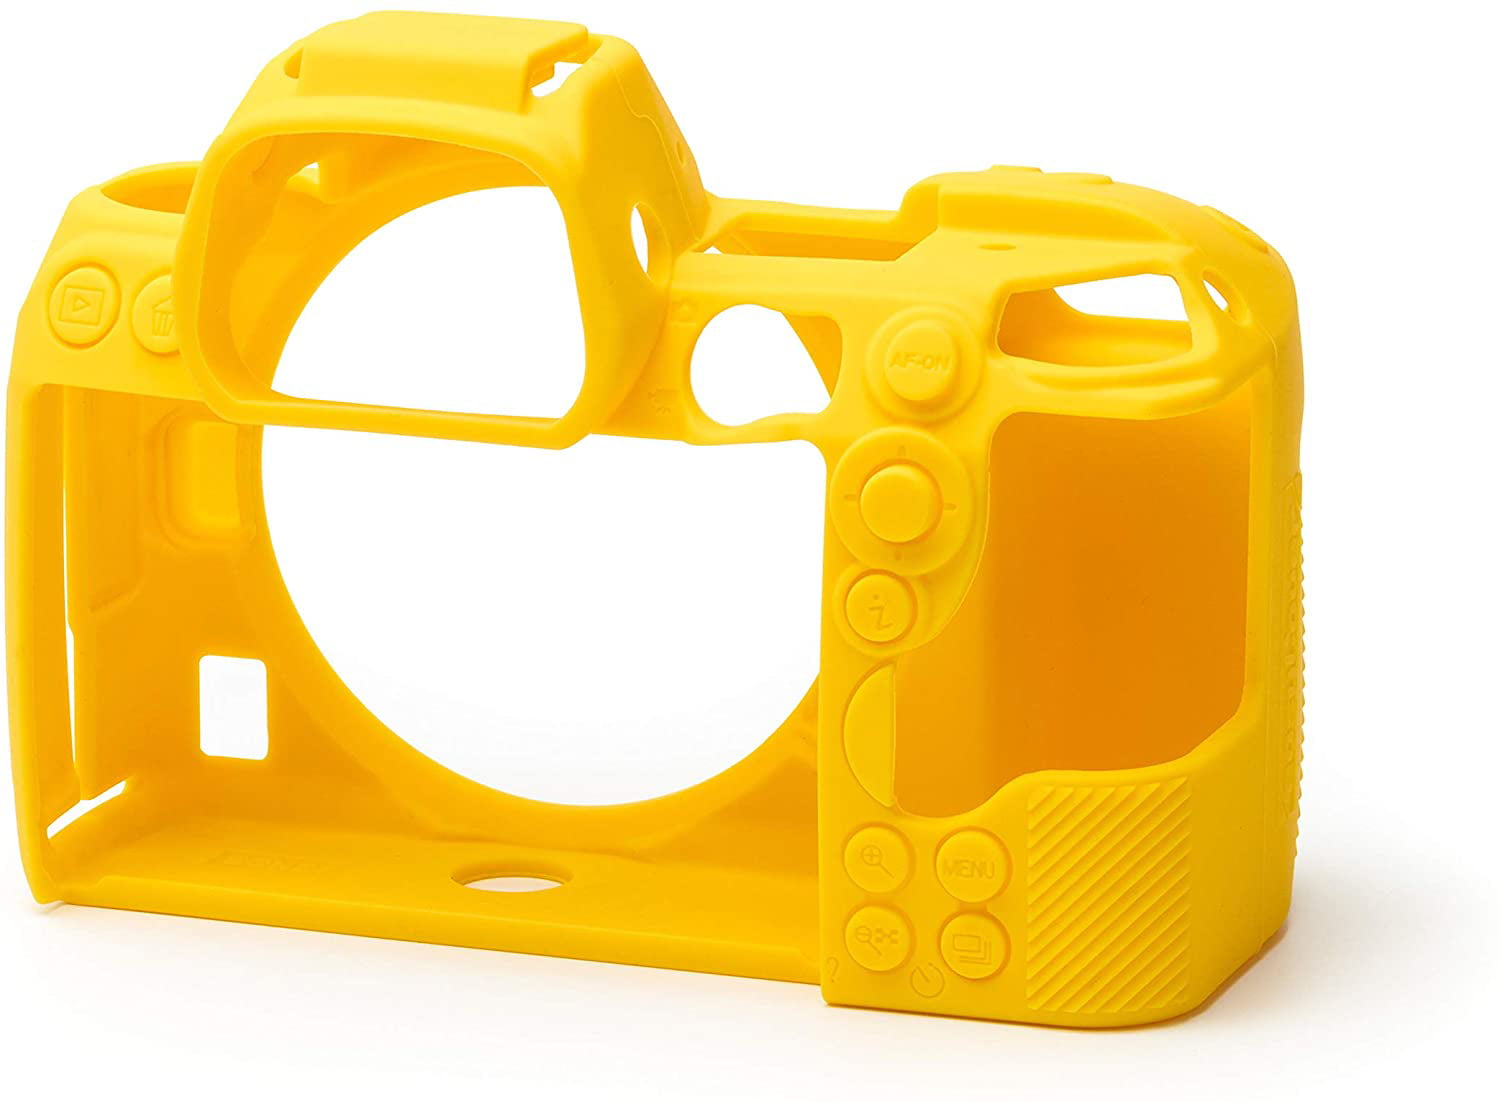 Yellow easyCover Silicone Camera Protection Cover for Nikon Z6 and Z7 